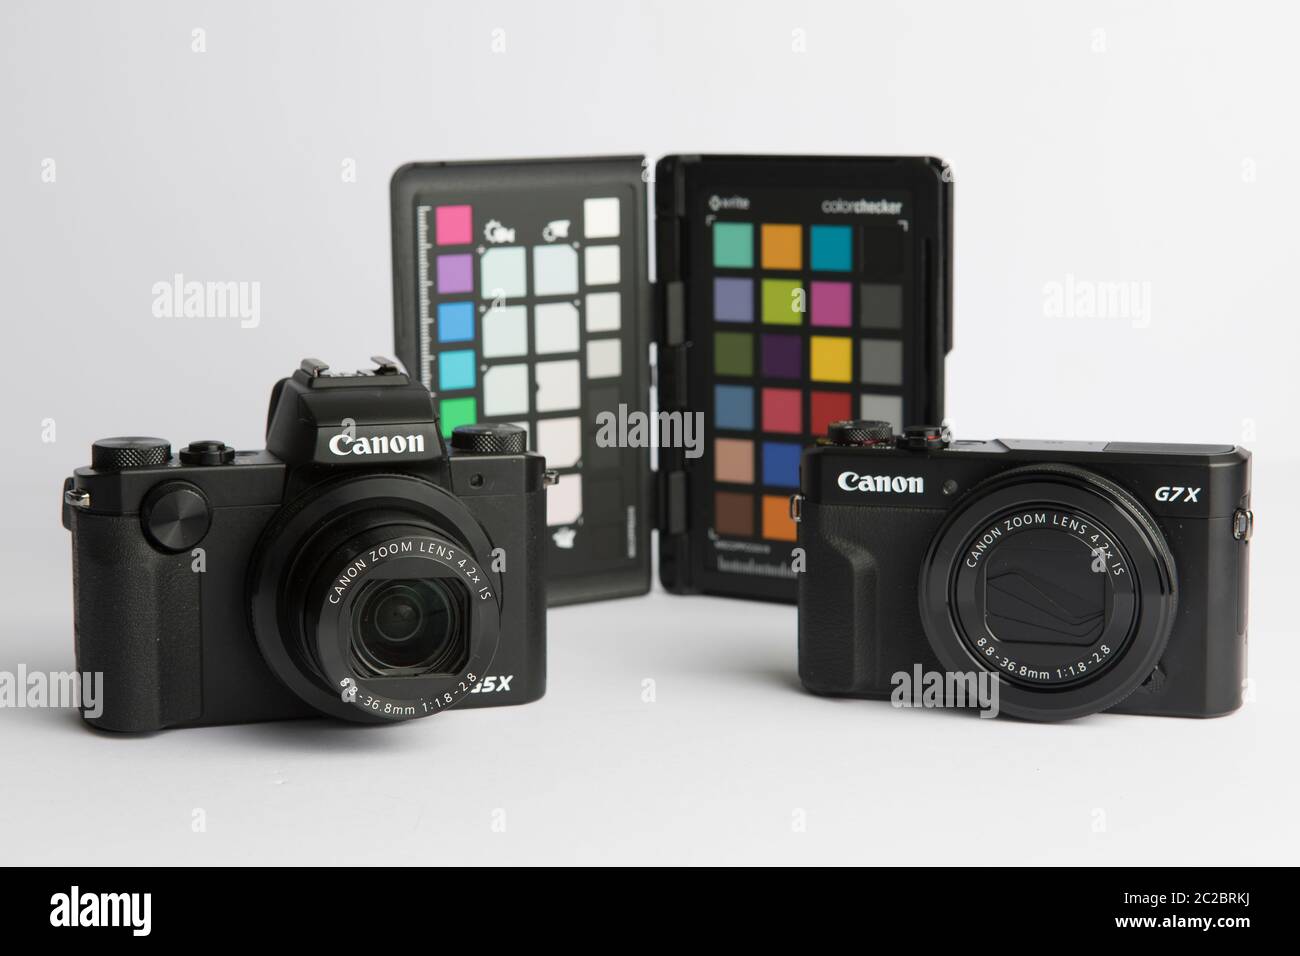 Milan, Italy - 17 June 2020: close up on Canon point and shoot cameras resting on white background. Stock Photo